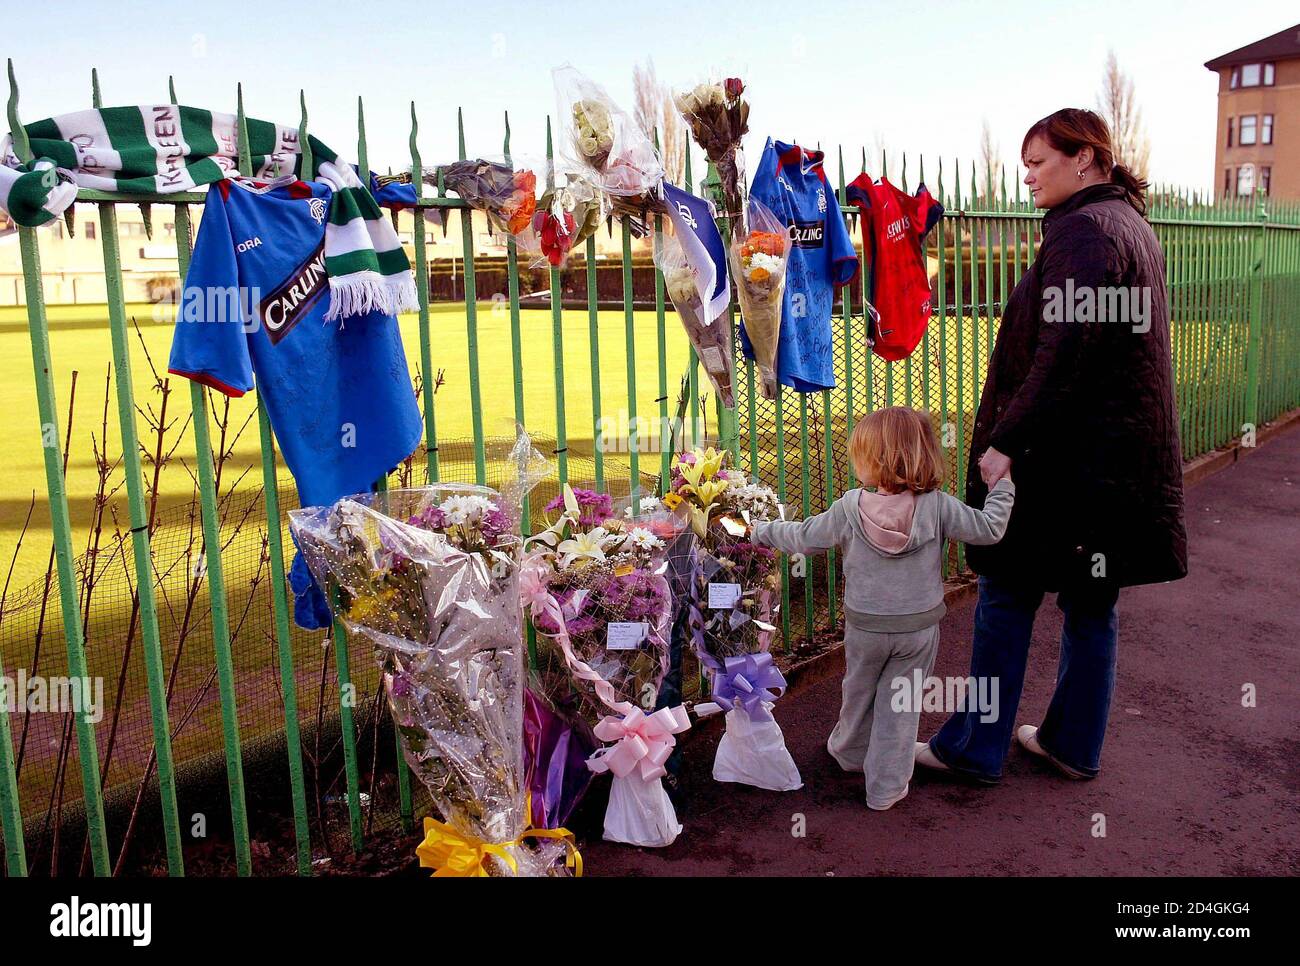 A woman and child look at flowers and Rangers' football shirts hanging from a fence in Kenmure Street, Glasgow, where 15-year-old murder victim Kriss Donald was snatched by a group of men near his home, March 17, 2004. Donald was snatched on Monday by five men said by police to be of Asian appearance, in southern Glasgow and his badly beaten body was found the next day behind a Celtic supporters' club in the east end of the city. REUTERS/Jeff J Mitchell  JJM/MD/THI Stock Photo